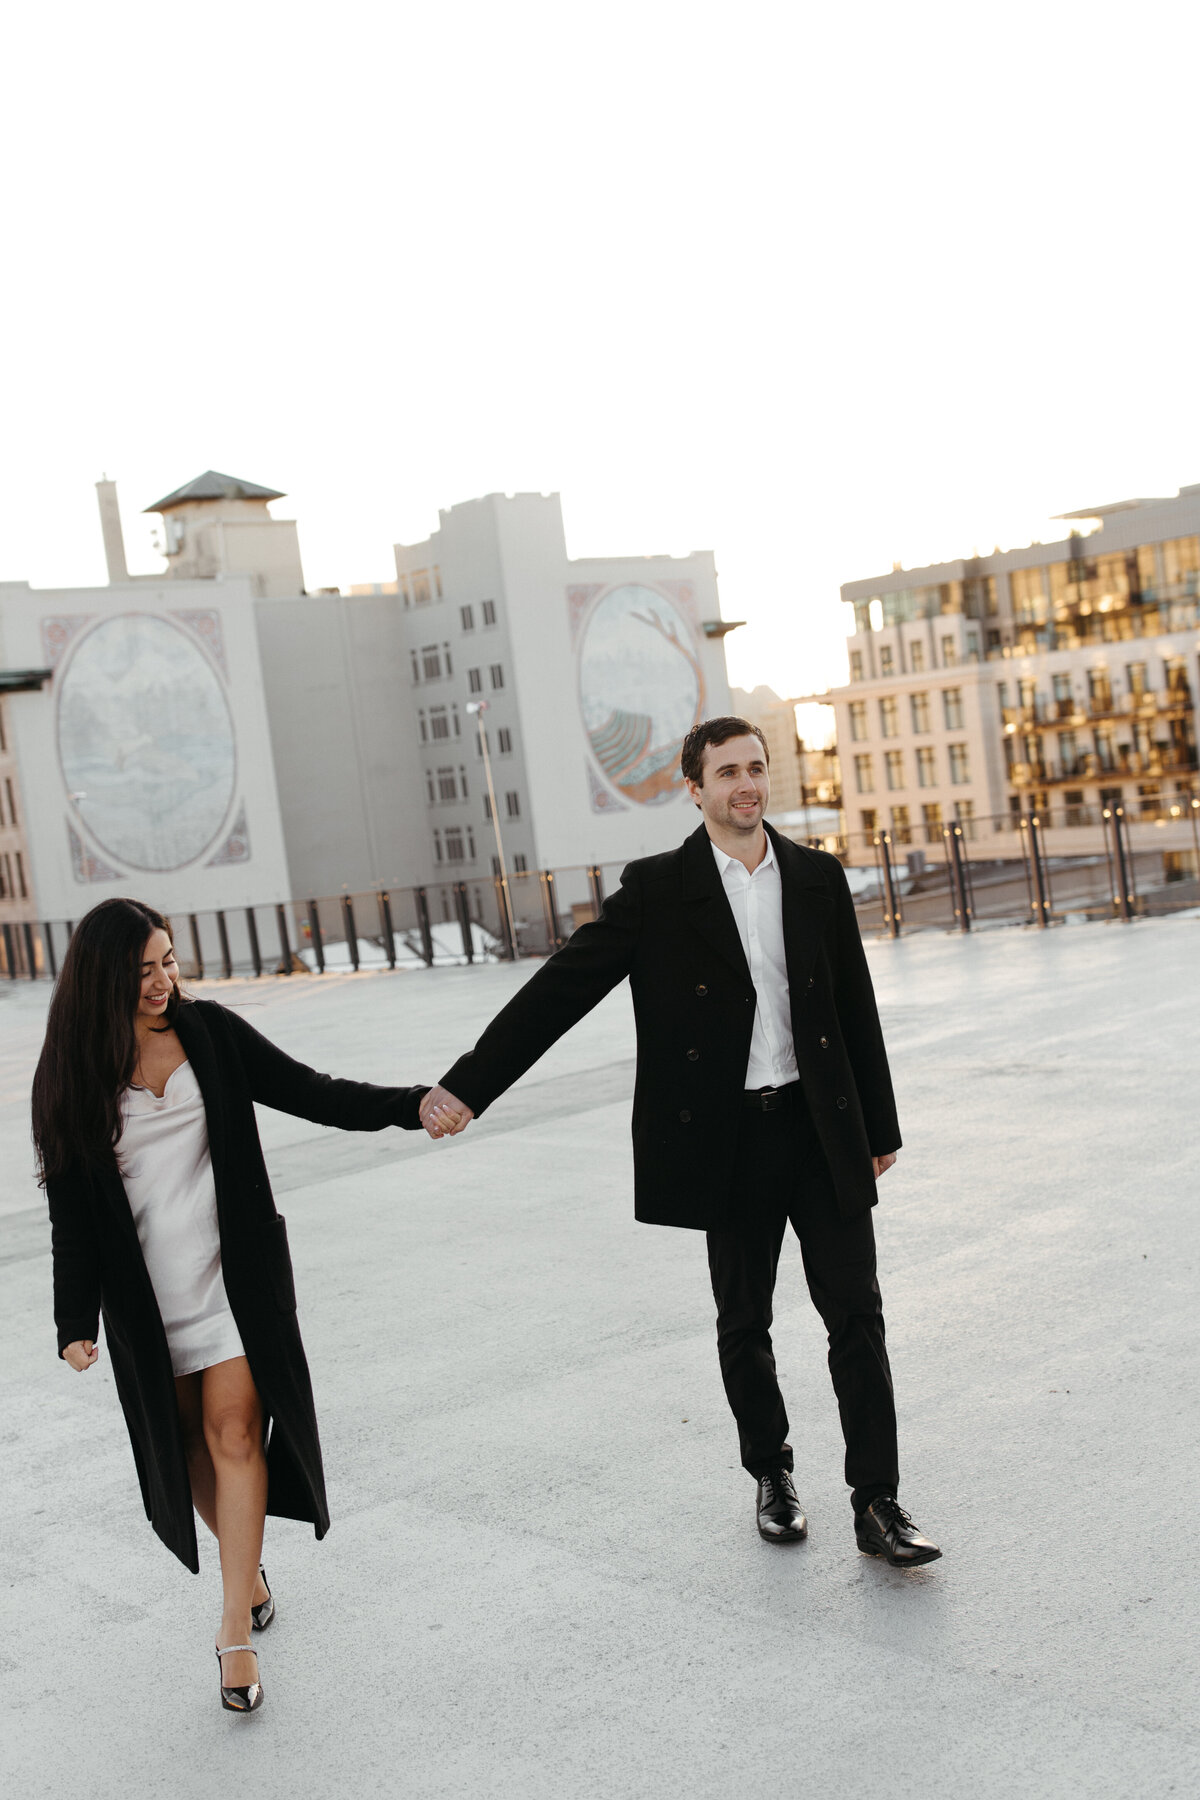 natalina&robbie_victoria_british_columbia_vancouver_island_downtown_rooftop_engagement_session_timeless_classy_elegant_old_money_sunset_stairs_romantic_couples_photos_photography_by_taiya224